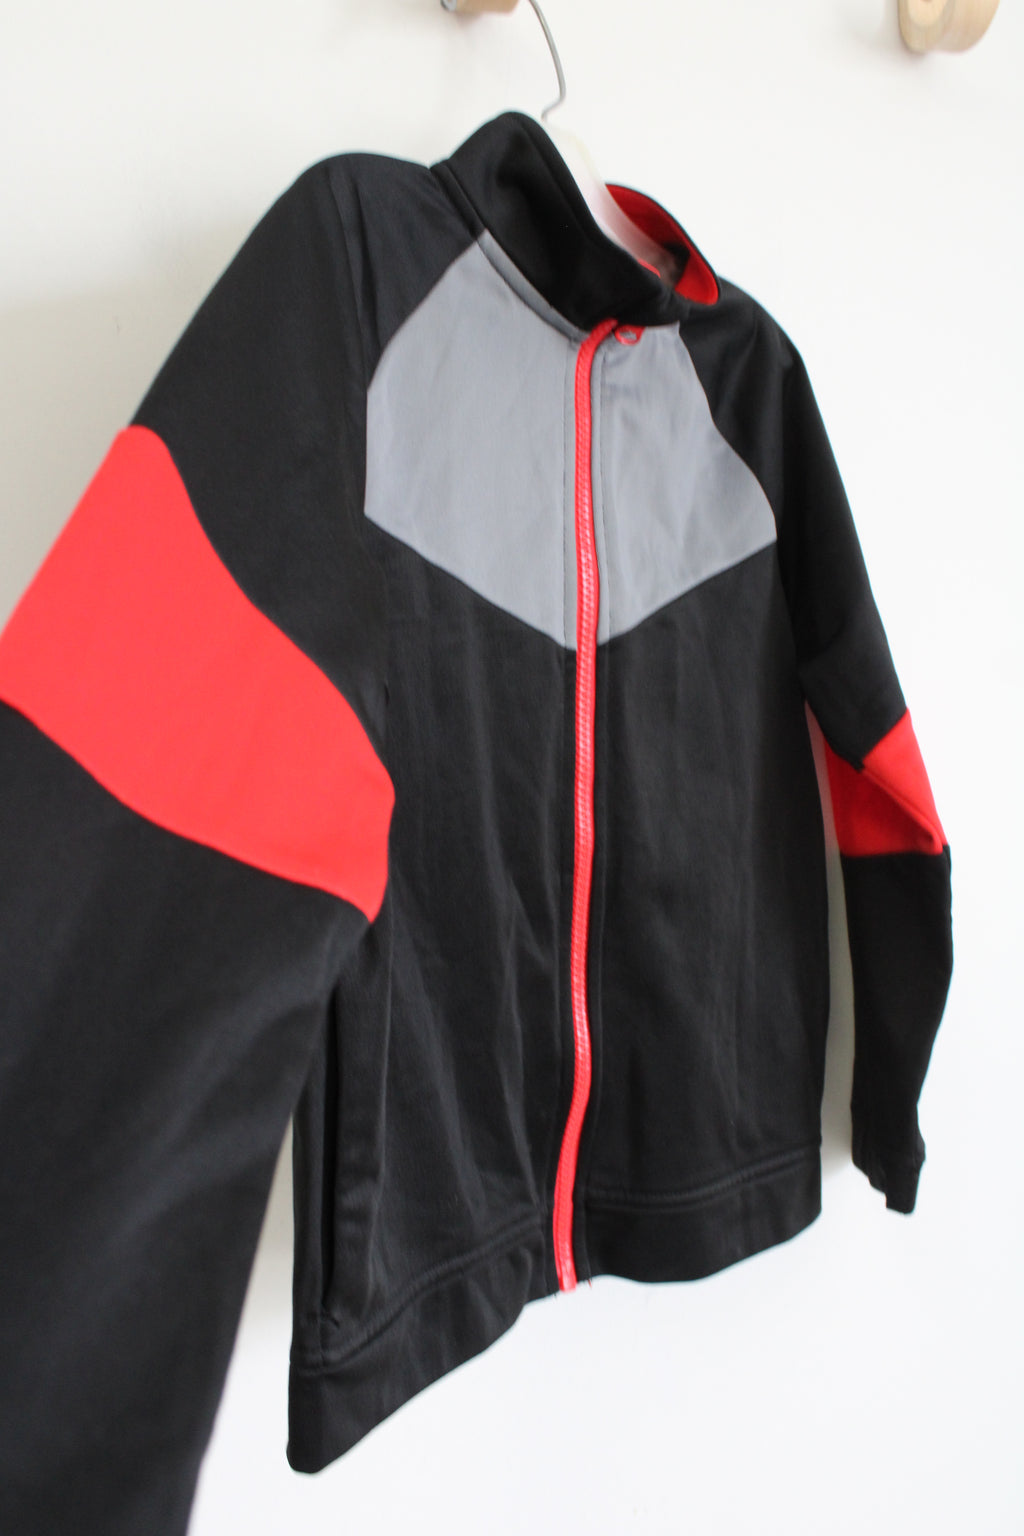 Athletic Works Black & Red Lightweight Zip Up Jacket | Youth S (6/7)